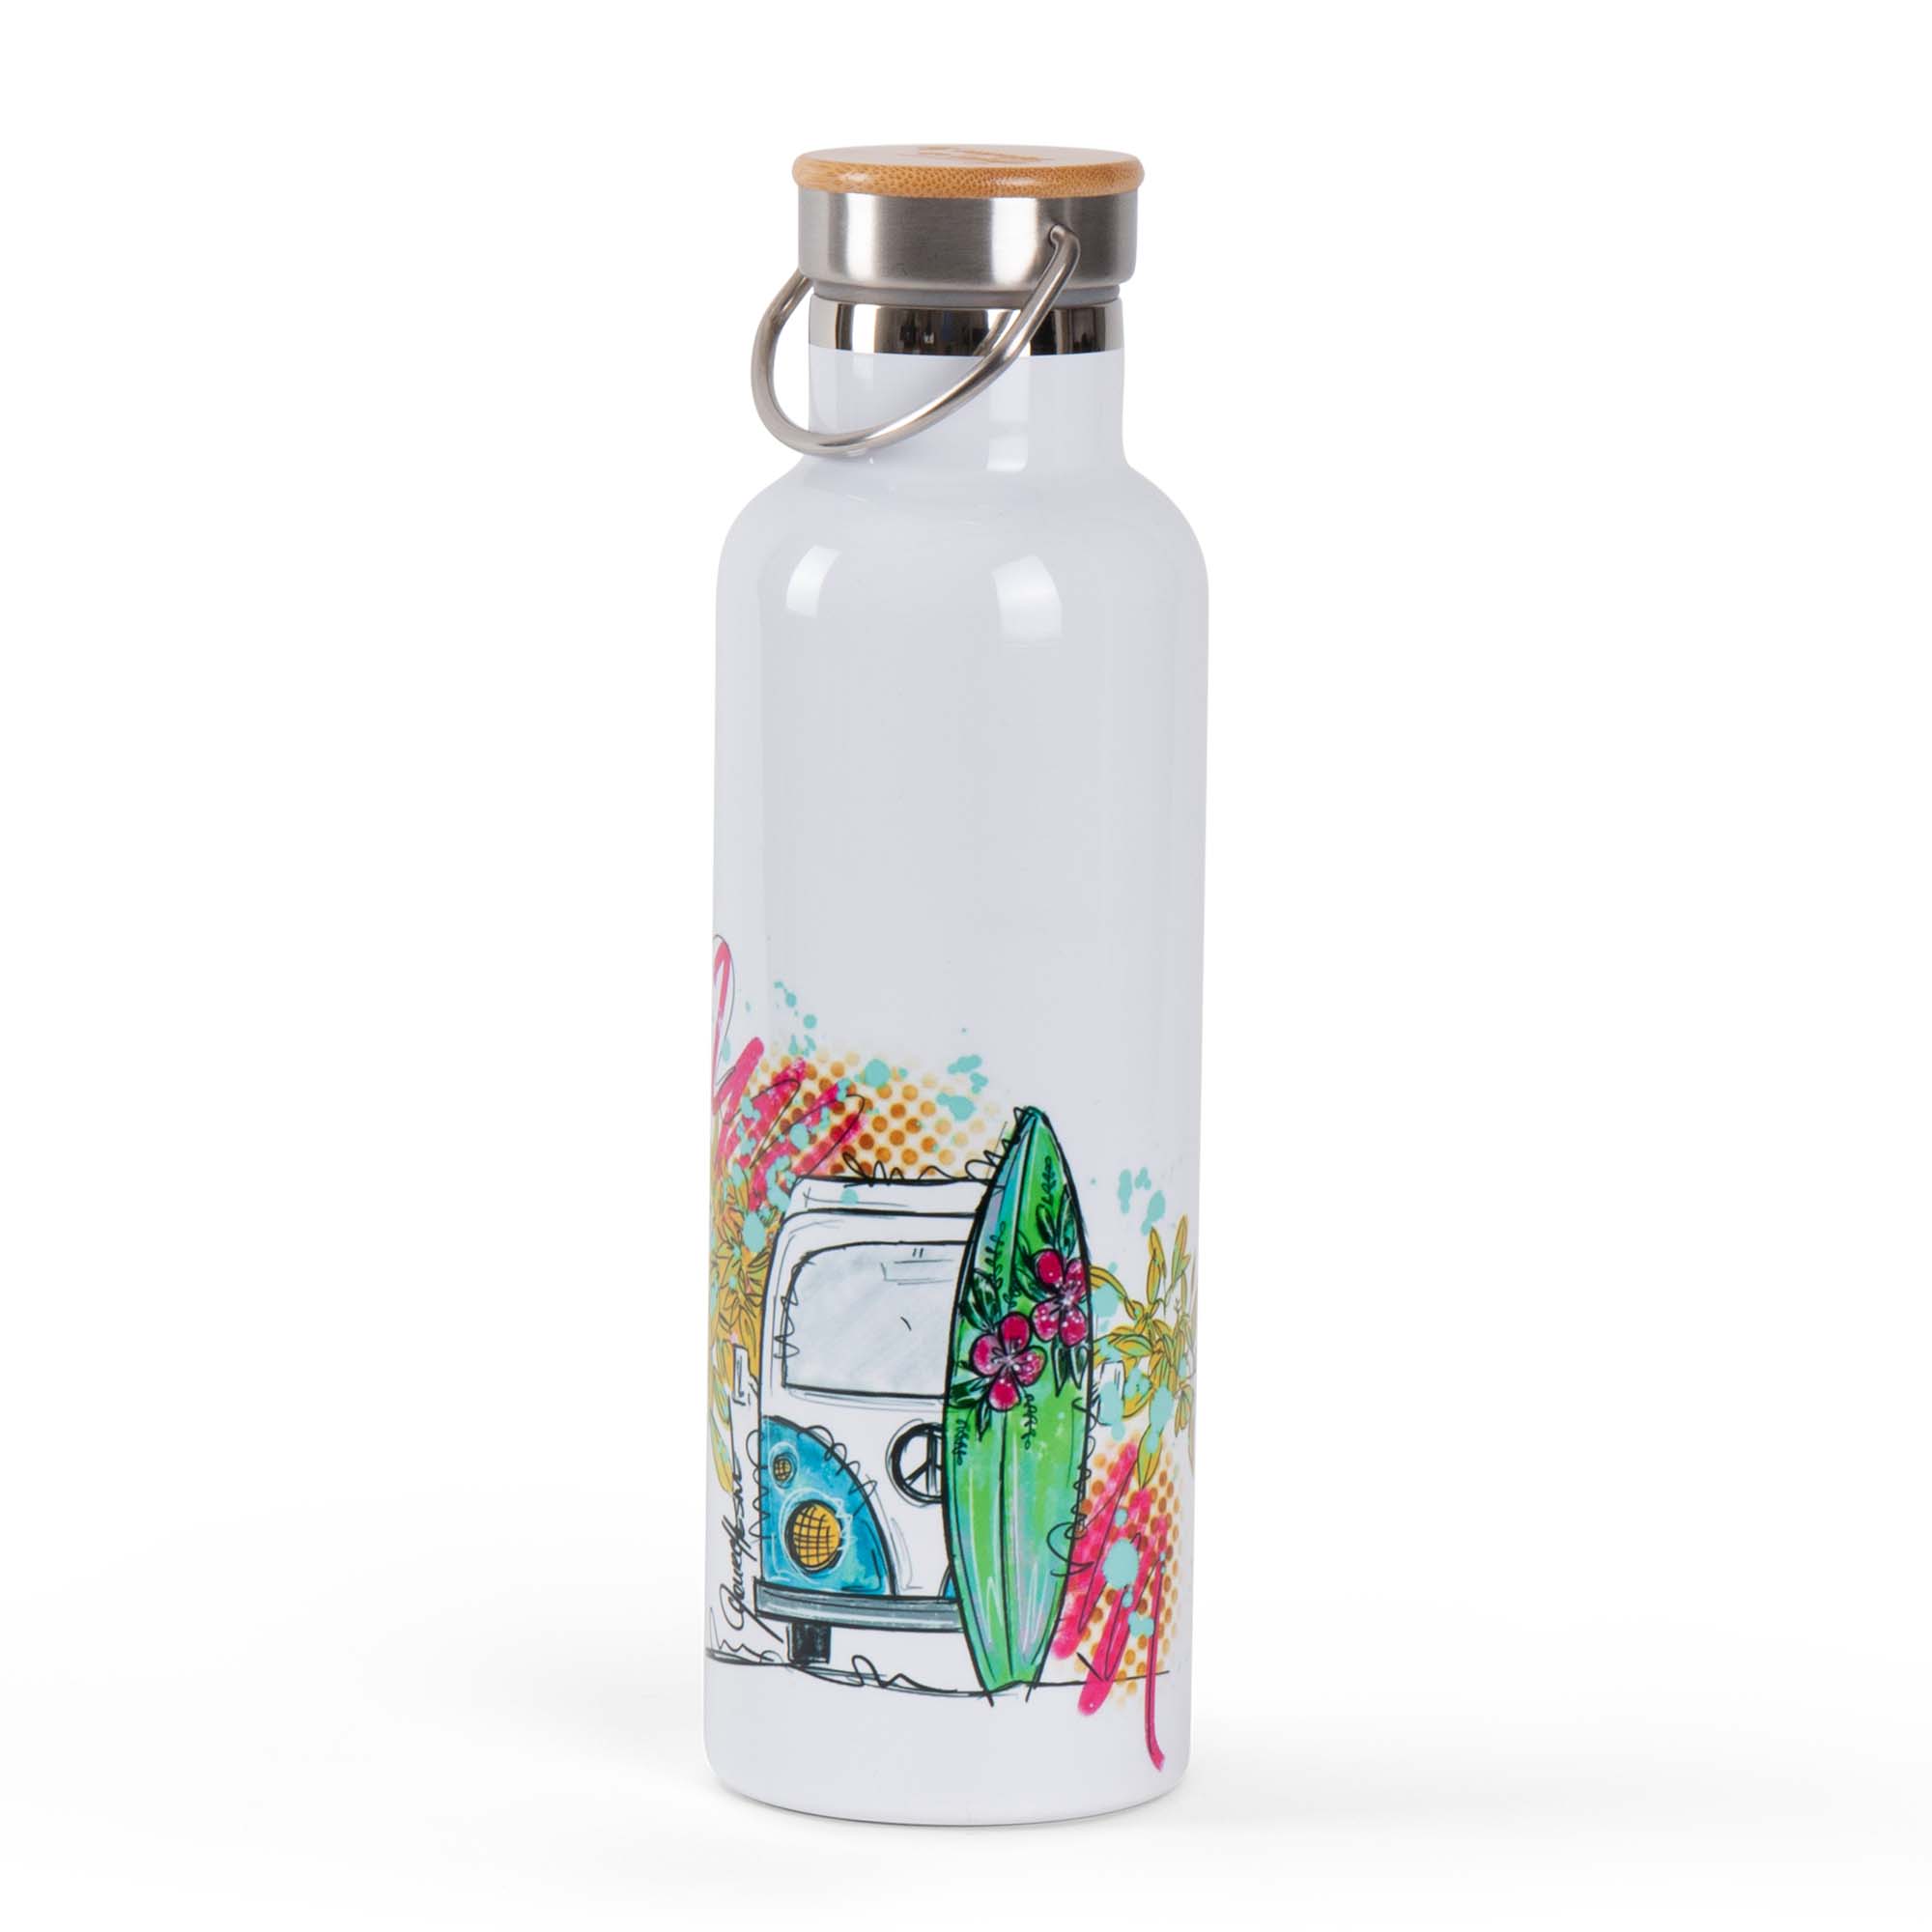 New! Stainless Steel Water Bottles by Julie Courchesne